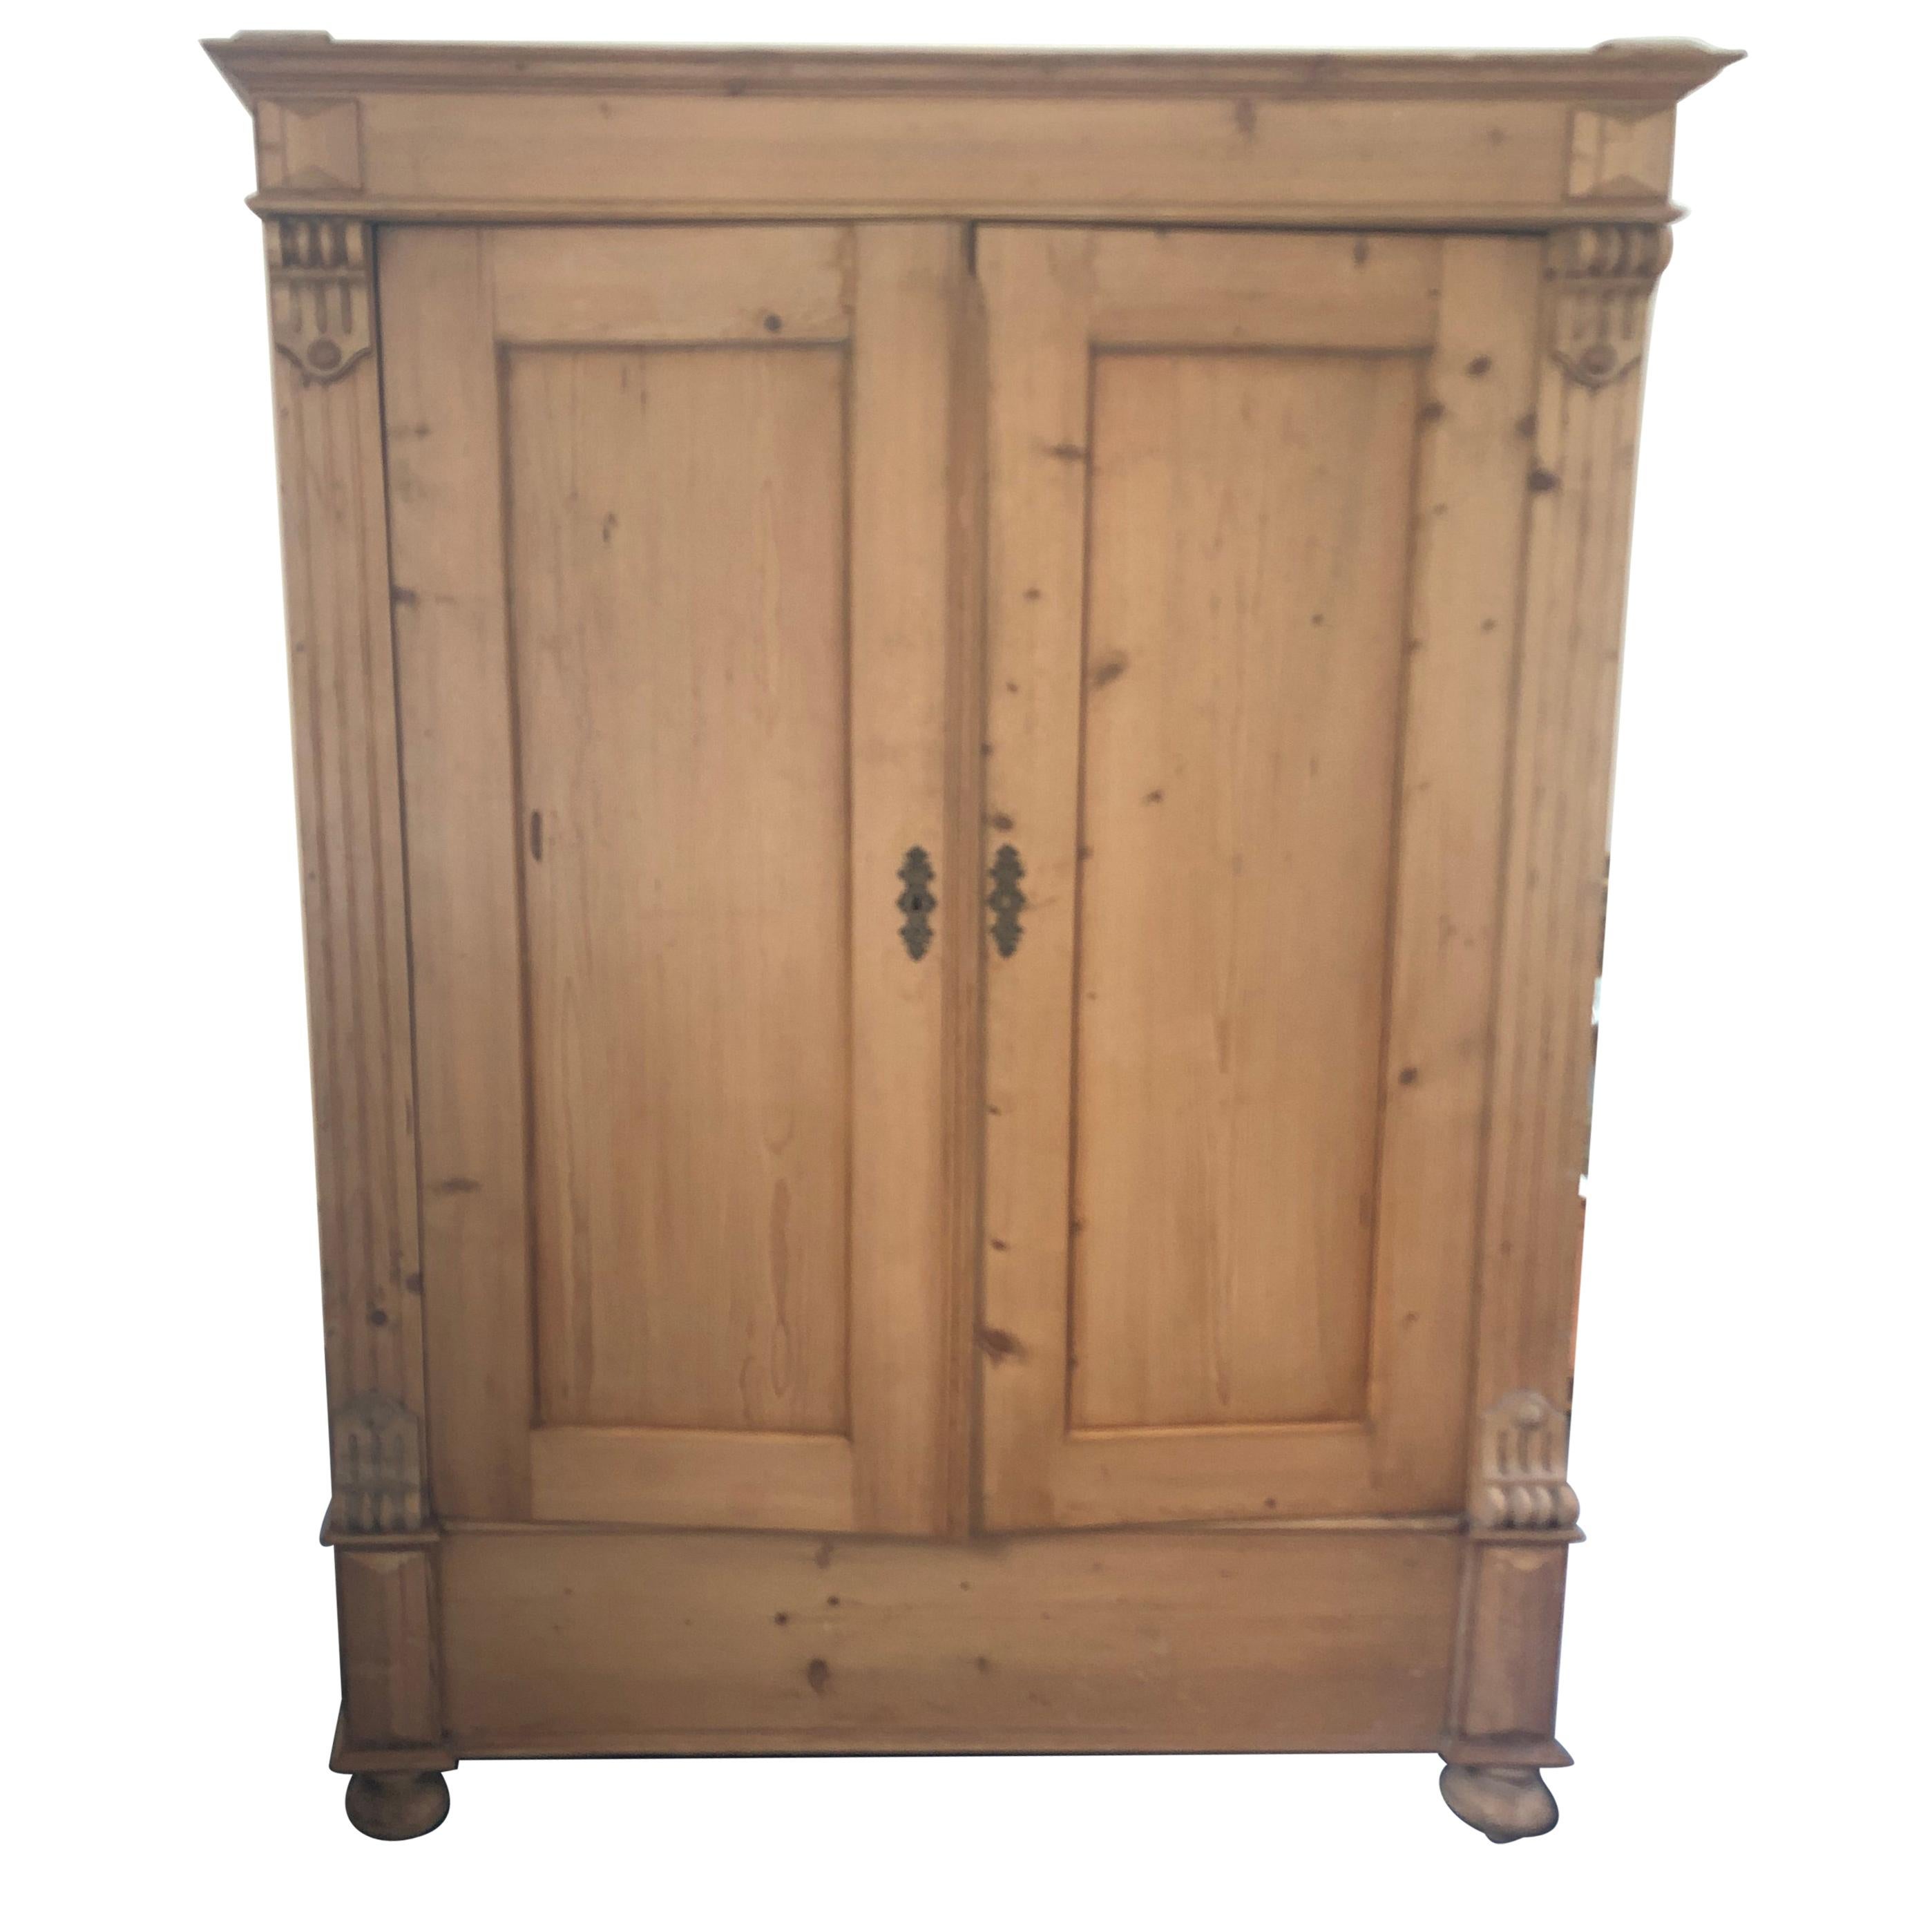 Charming Large Antique Rustic Natural Pine Cupboard Dry Bar